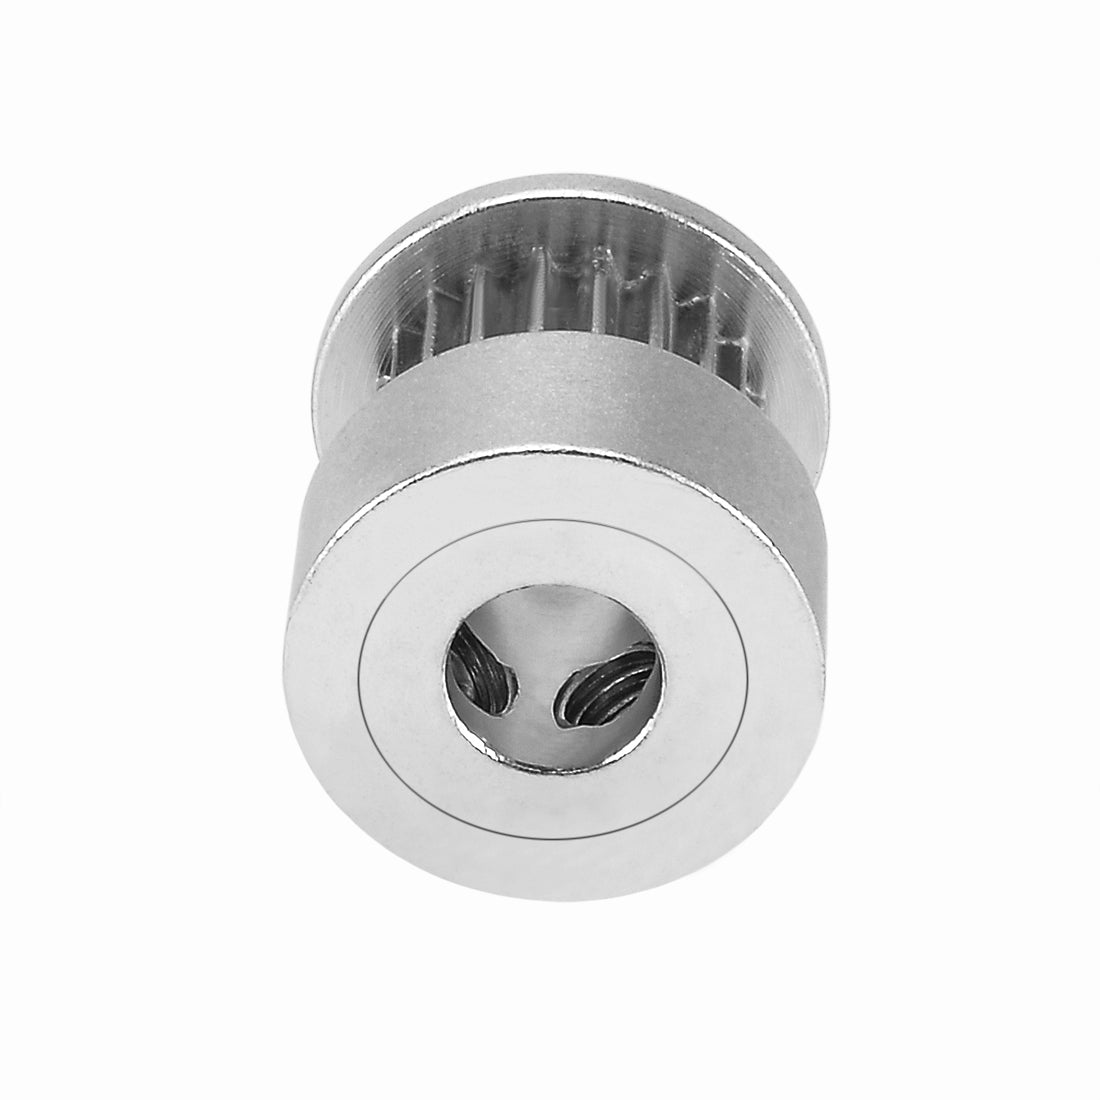 uxcell Uxcell 3D Printer Aluminum Timing Pulley Flange Wheel 20 Teeth 6.35mm Bore 2mm Pitch for 6mm Belt